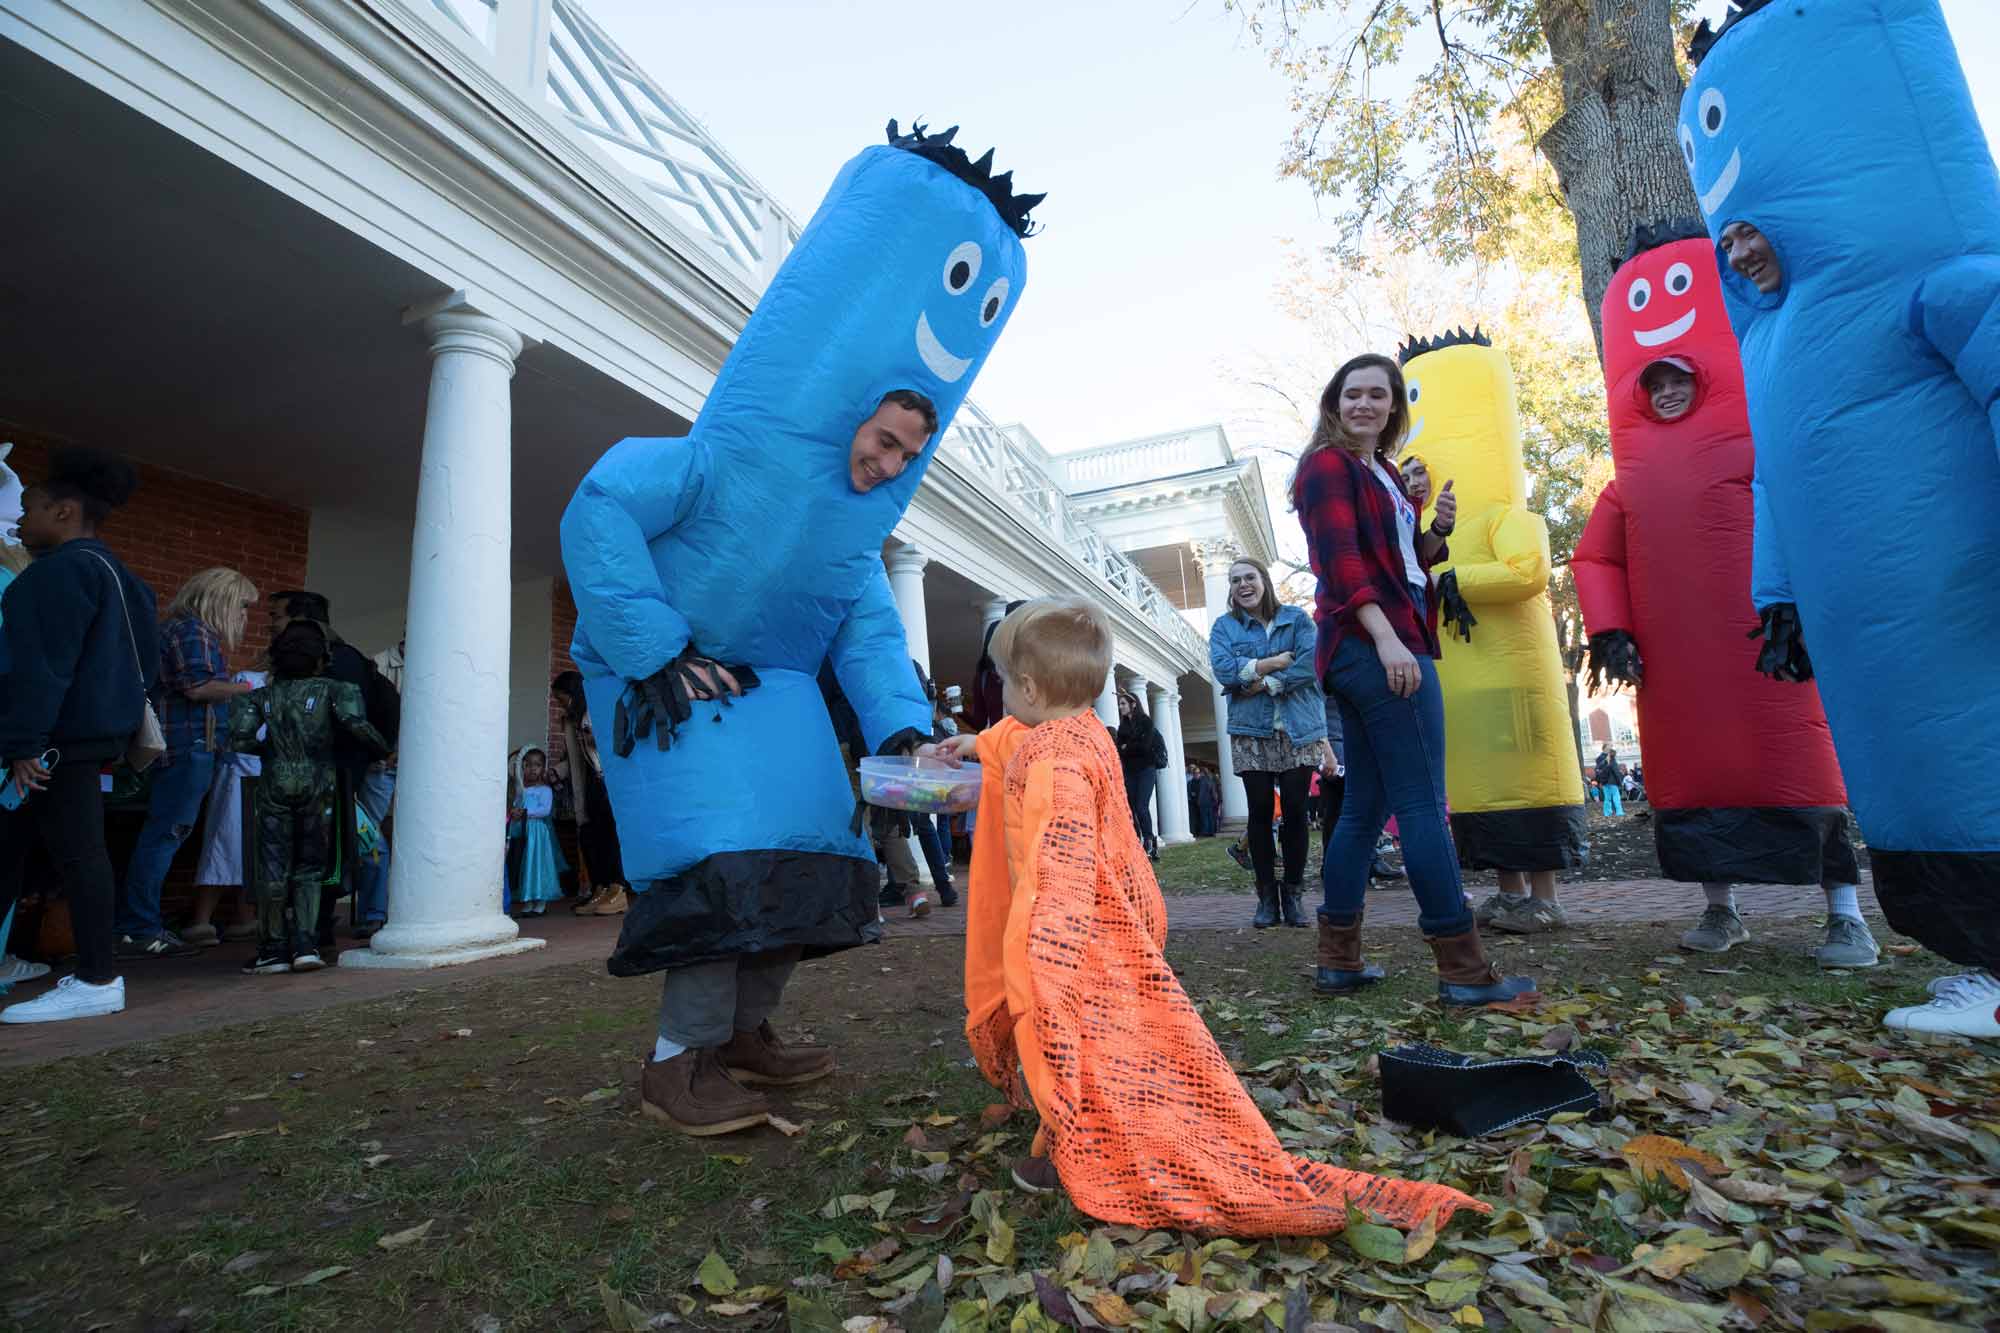 A student in a blue tube man costume gives candy to a child in an orange cape